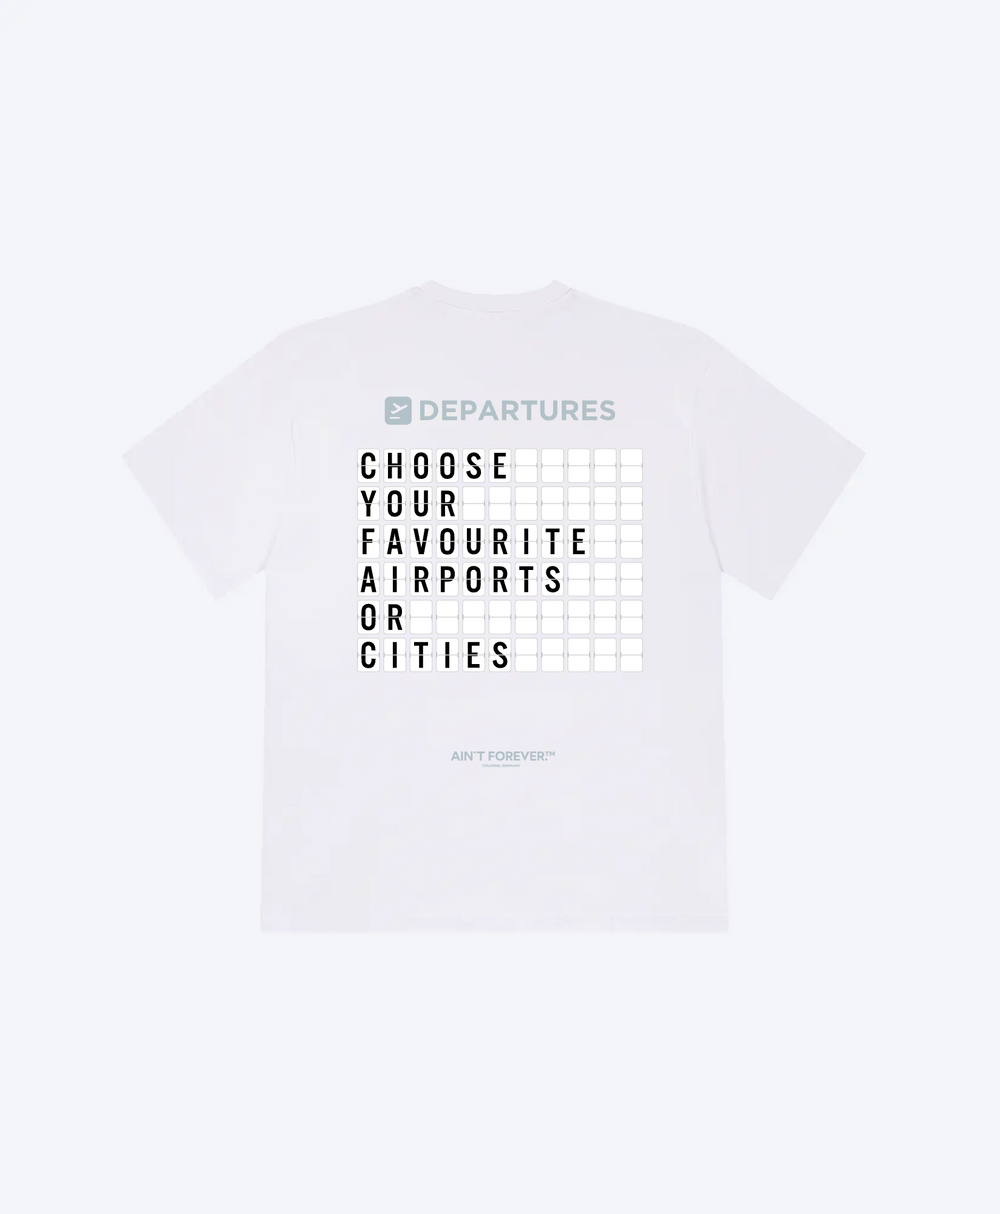 THE OVERSIZED DEPARTURES T-SHIRT (CONFIGURATOR) (WHITE / PASTEL BLUE)